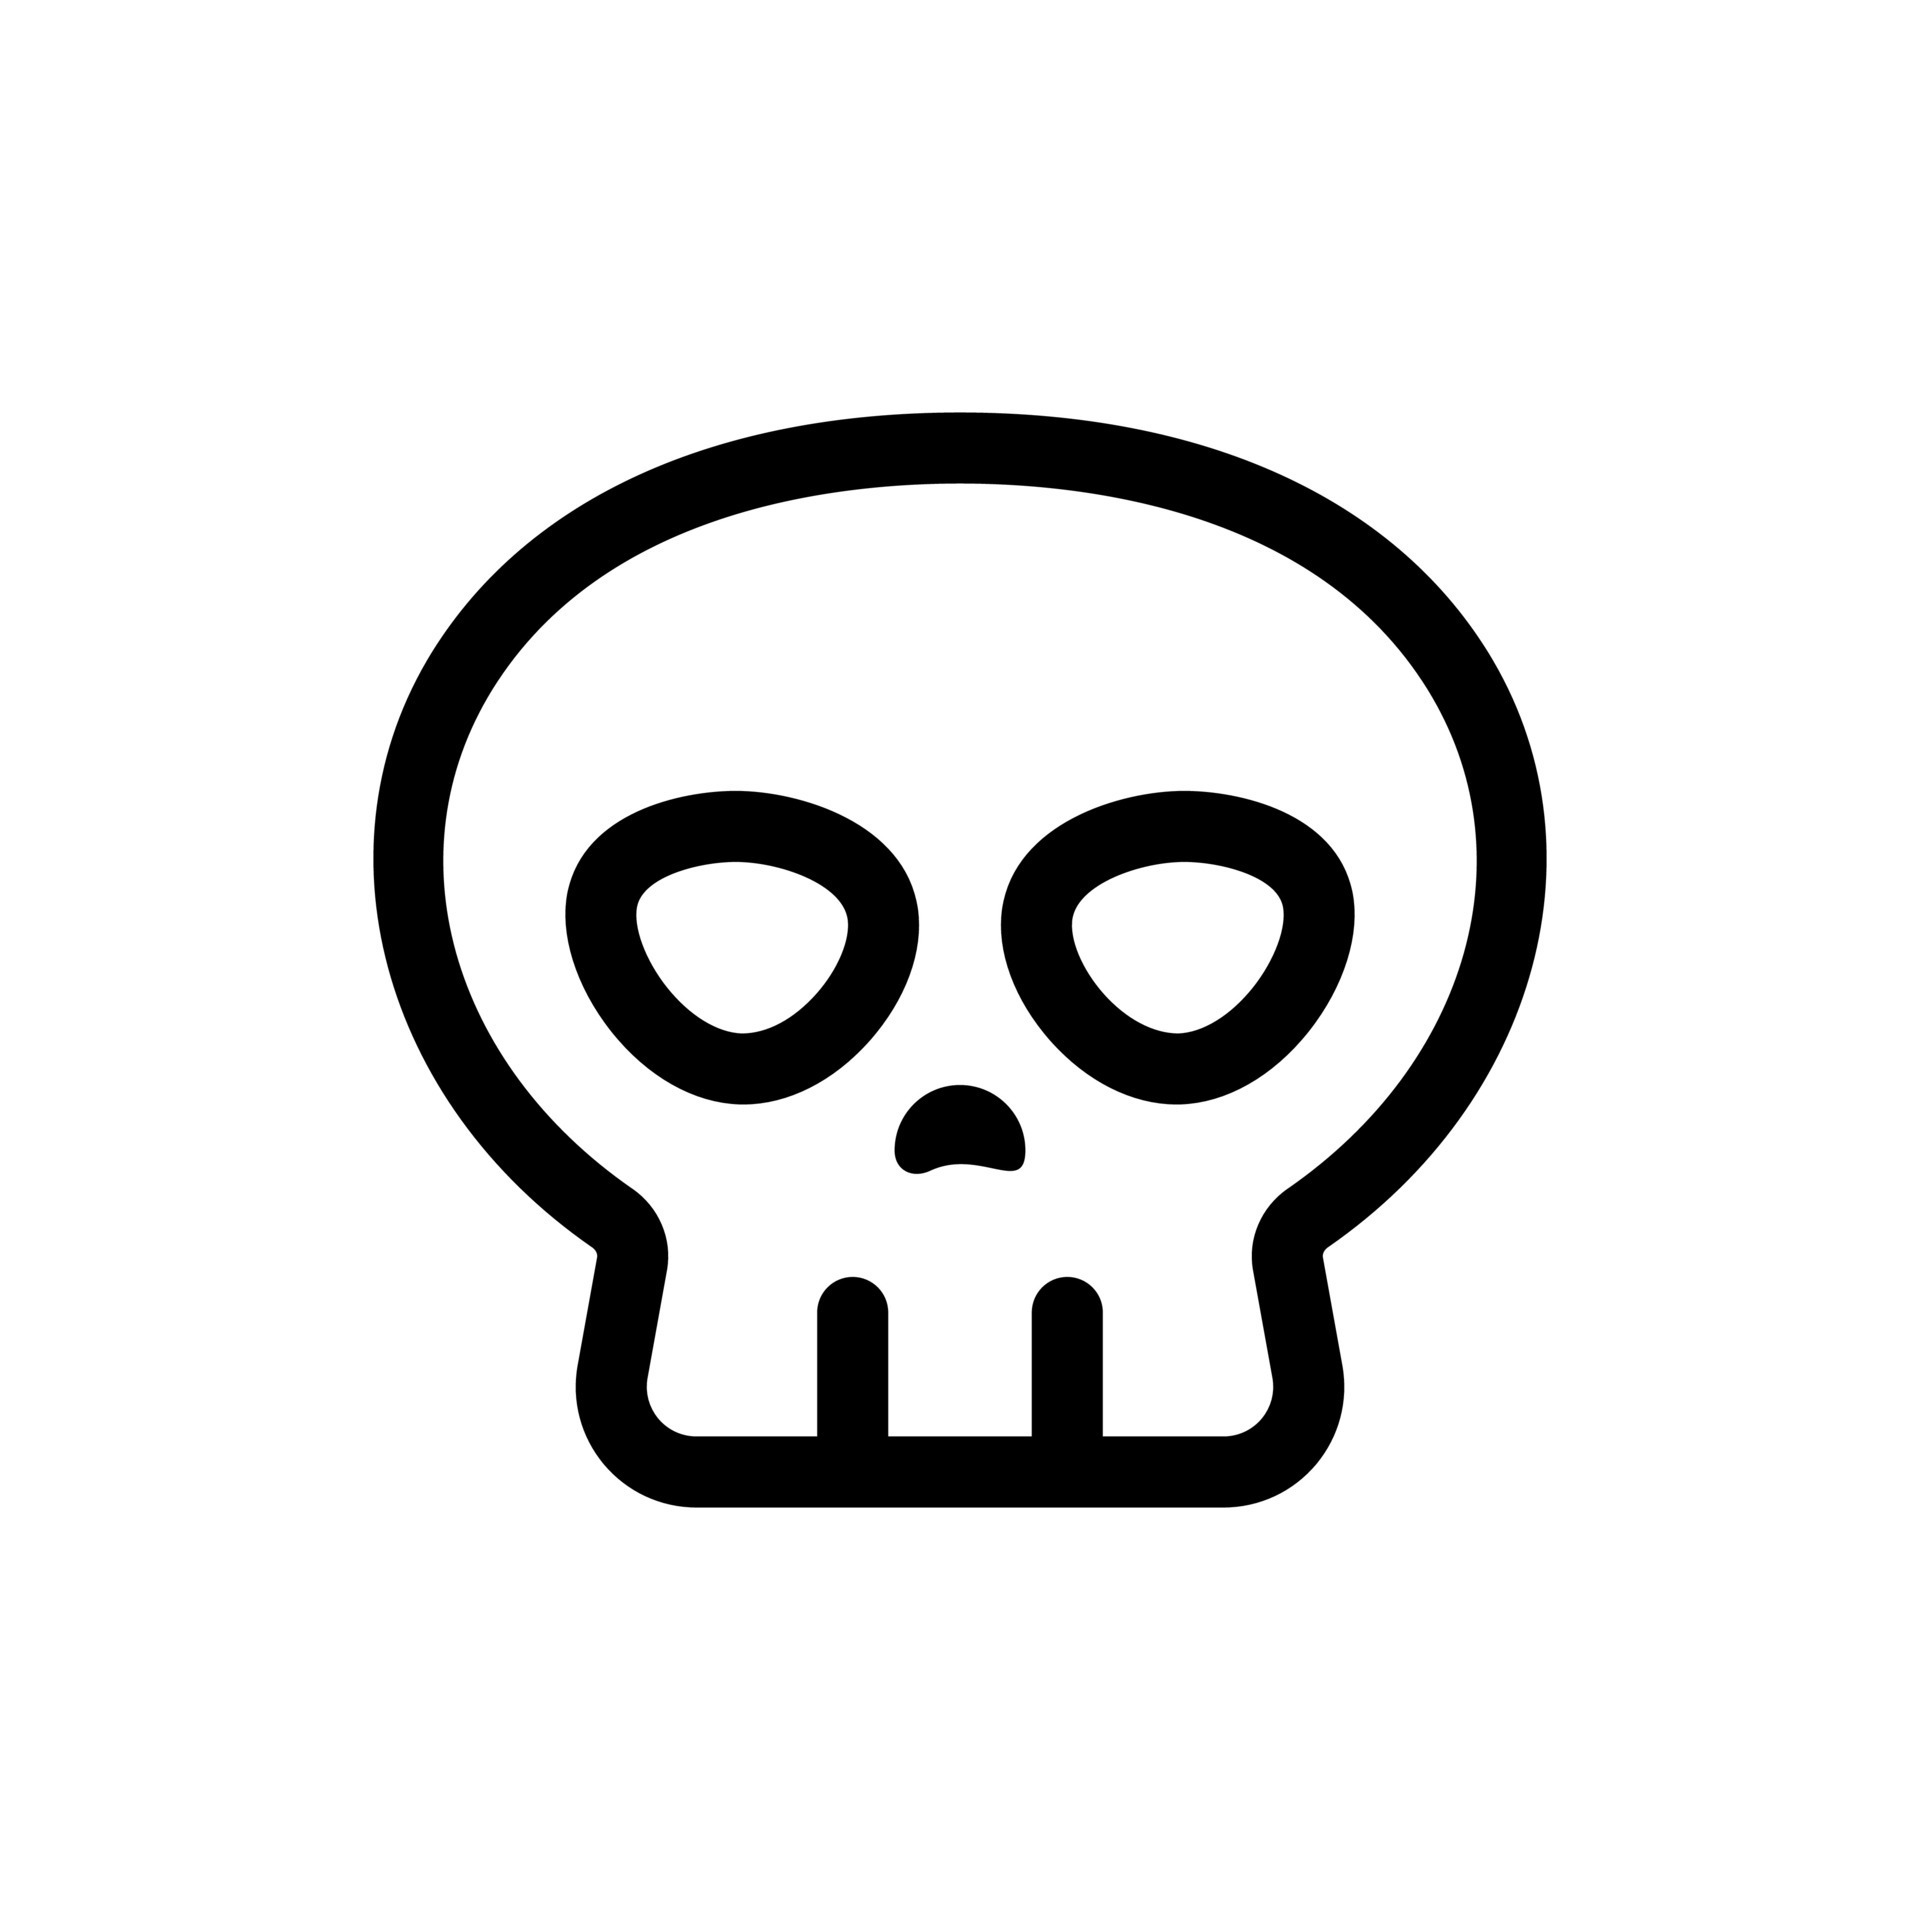 Simple Skull icon. The icon can be used for websites, print